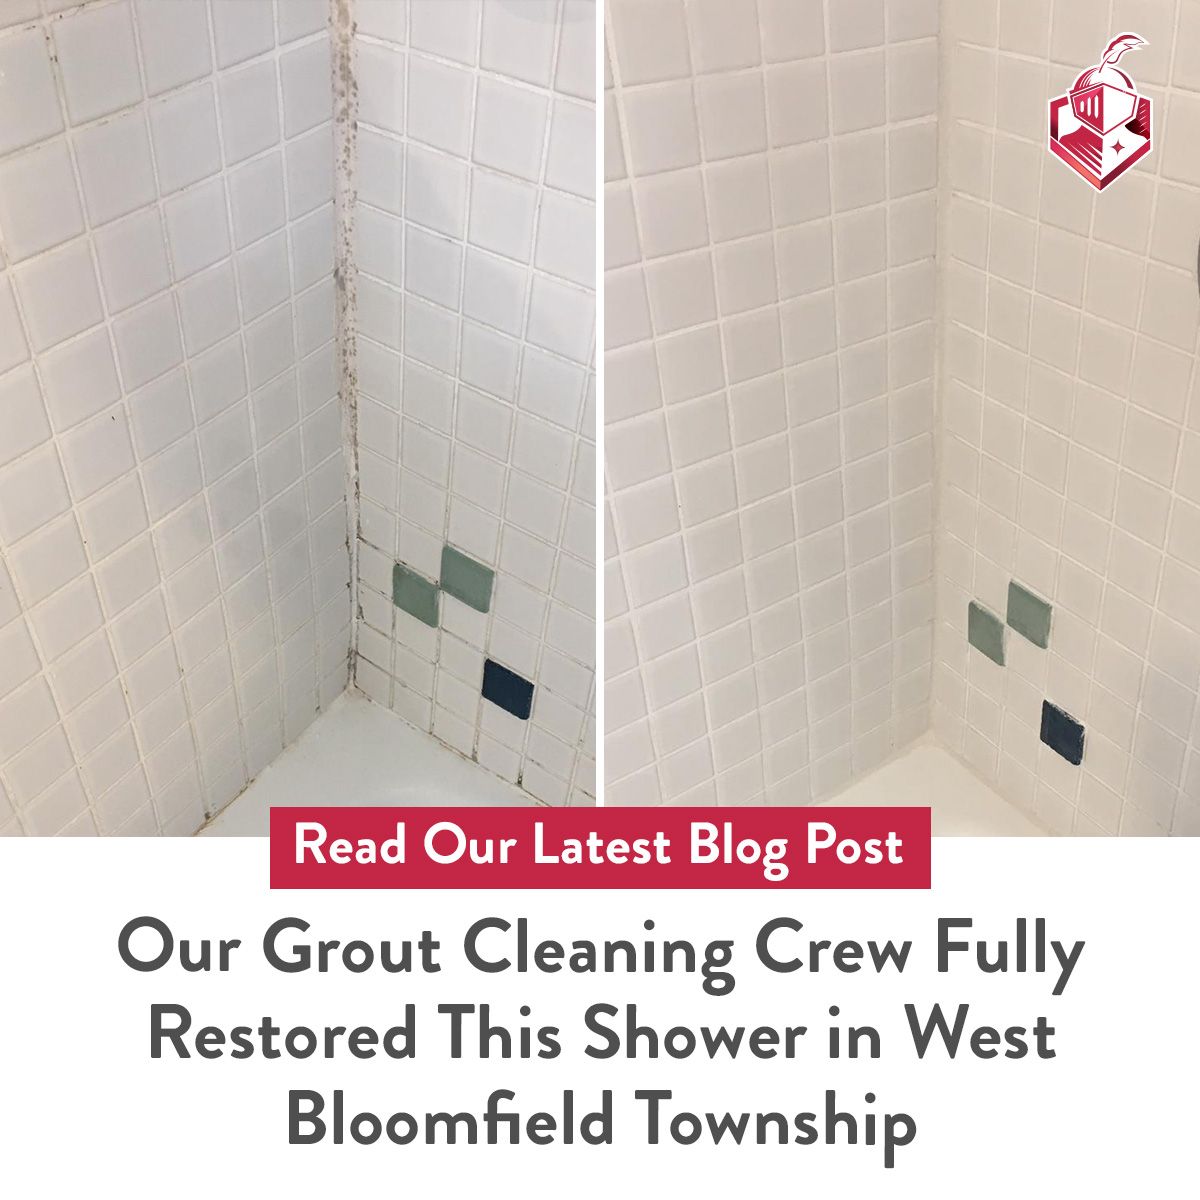 Our Grout Cleaning Crew Fully Restored This Shower in West Bloomfield Township